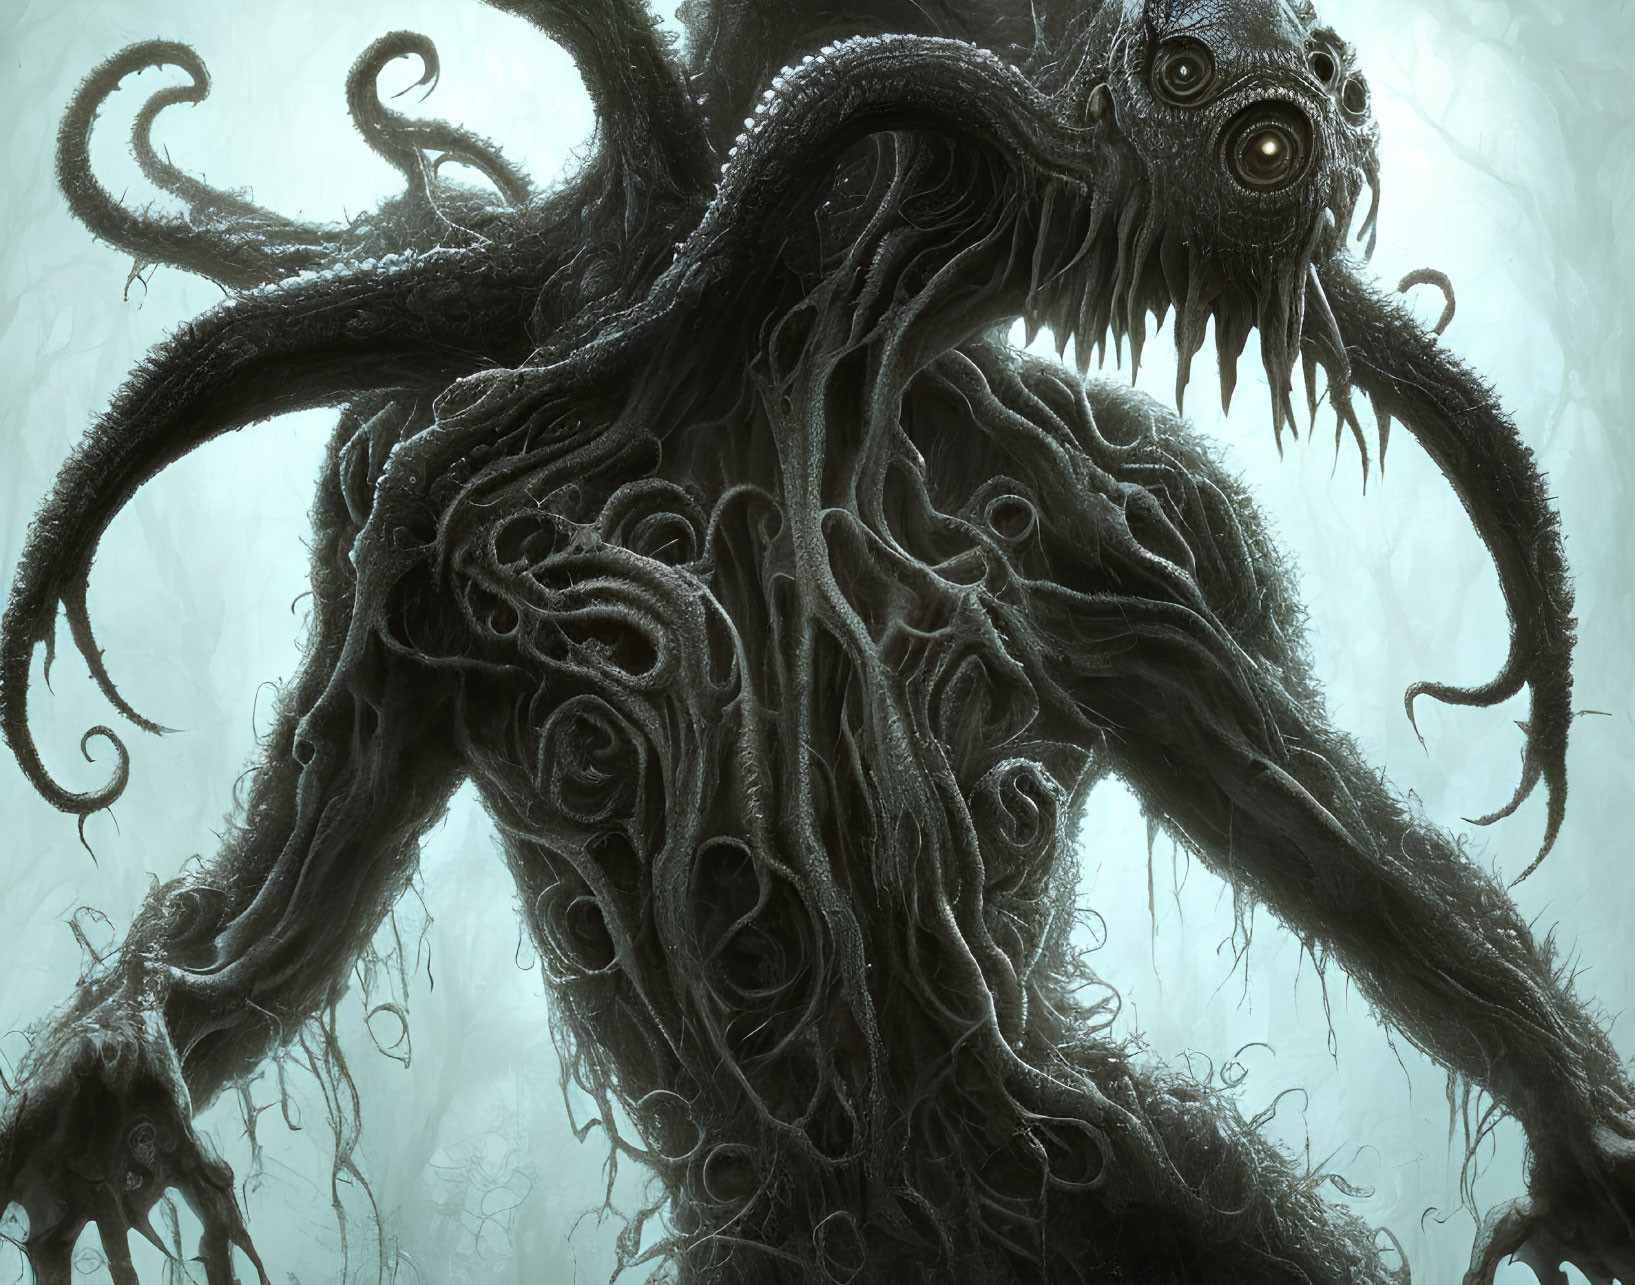 Monstrous creature with tentacles, sharp teeth, and single eye in misty setting